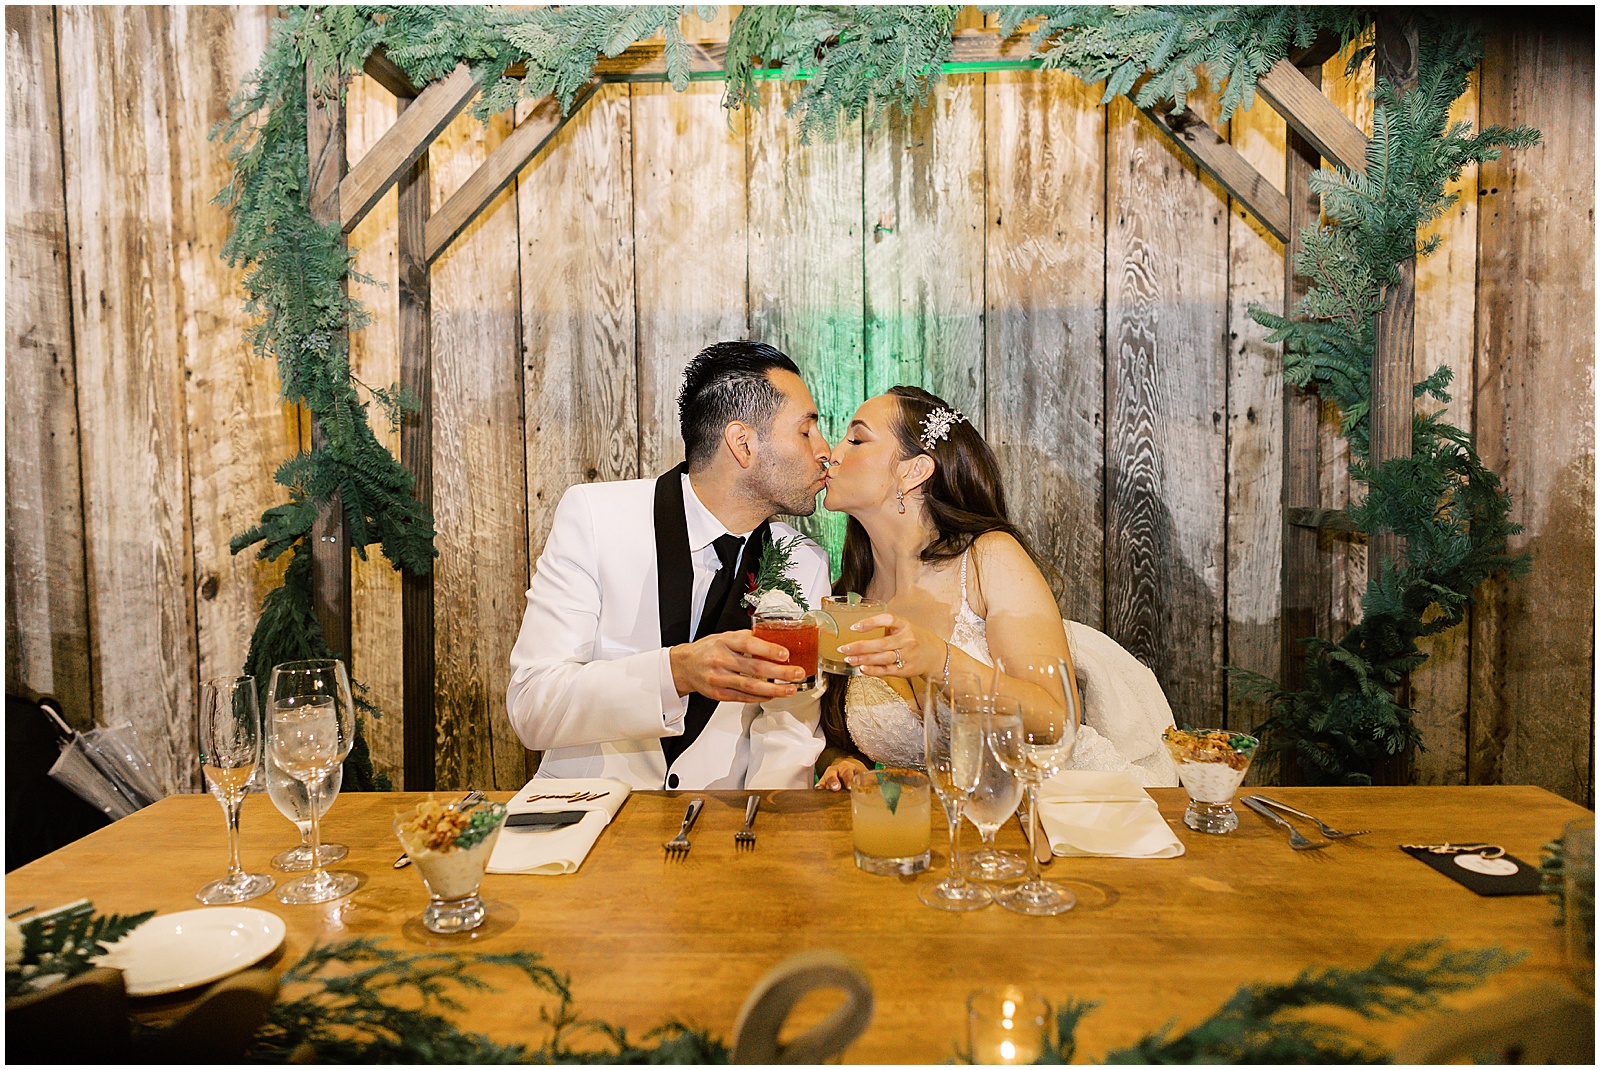 portrait of bride and groom making a toast during reception by film photographer AGS Photo Art